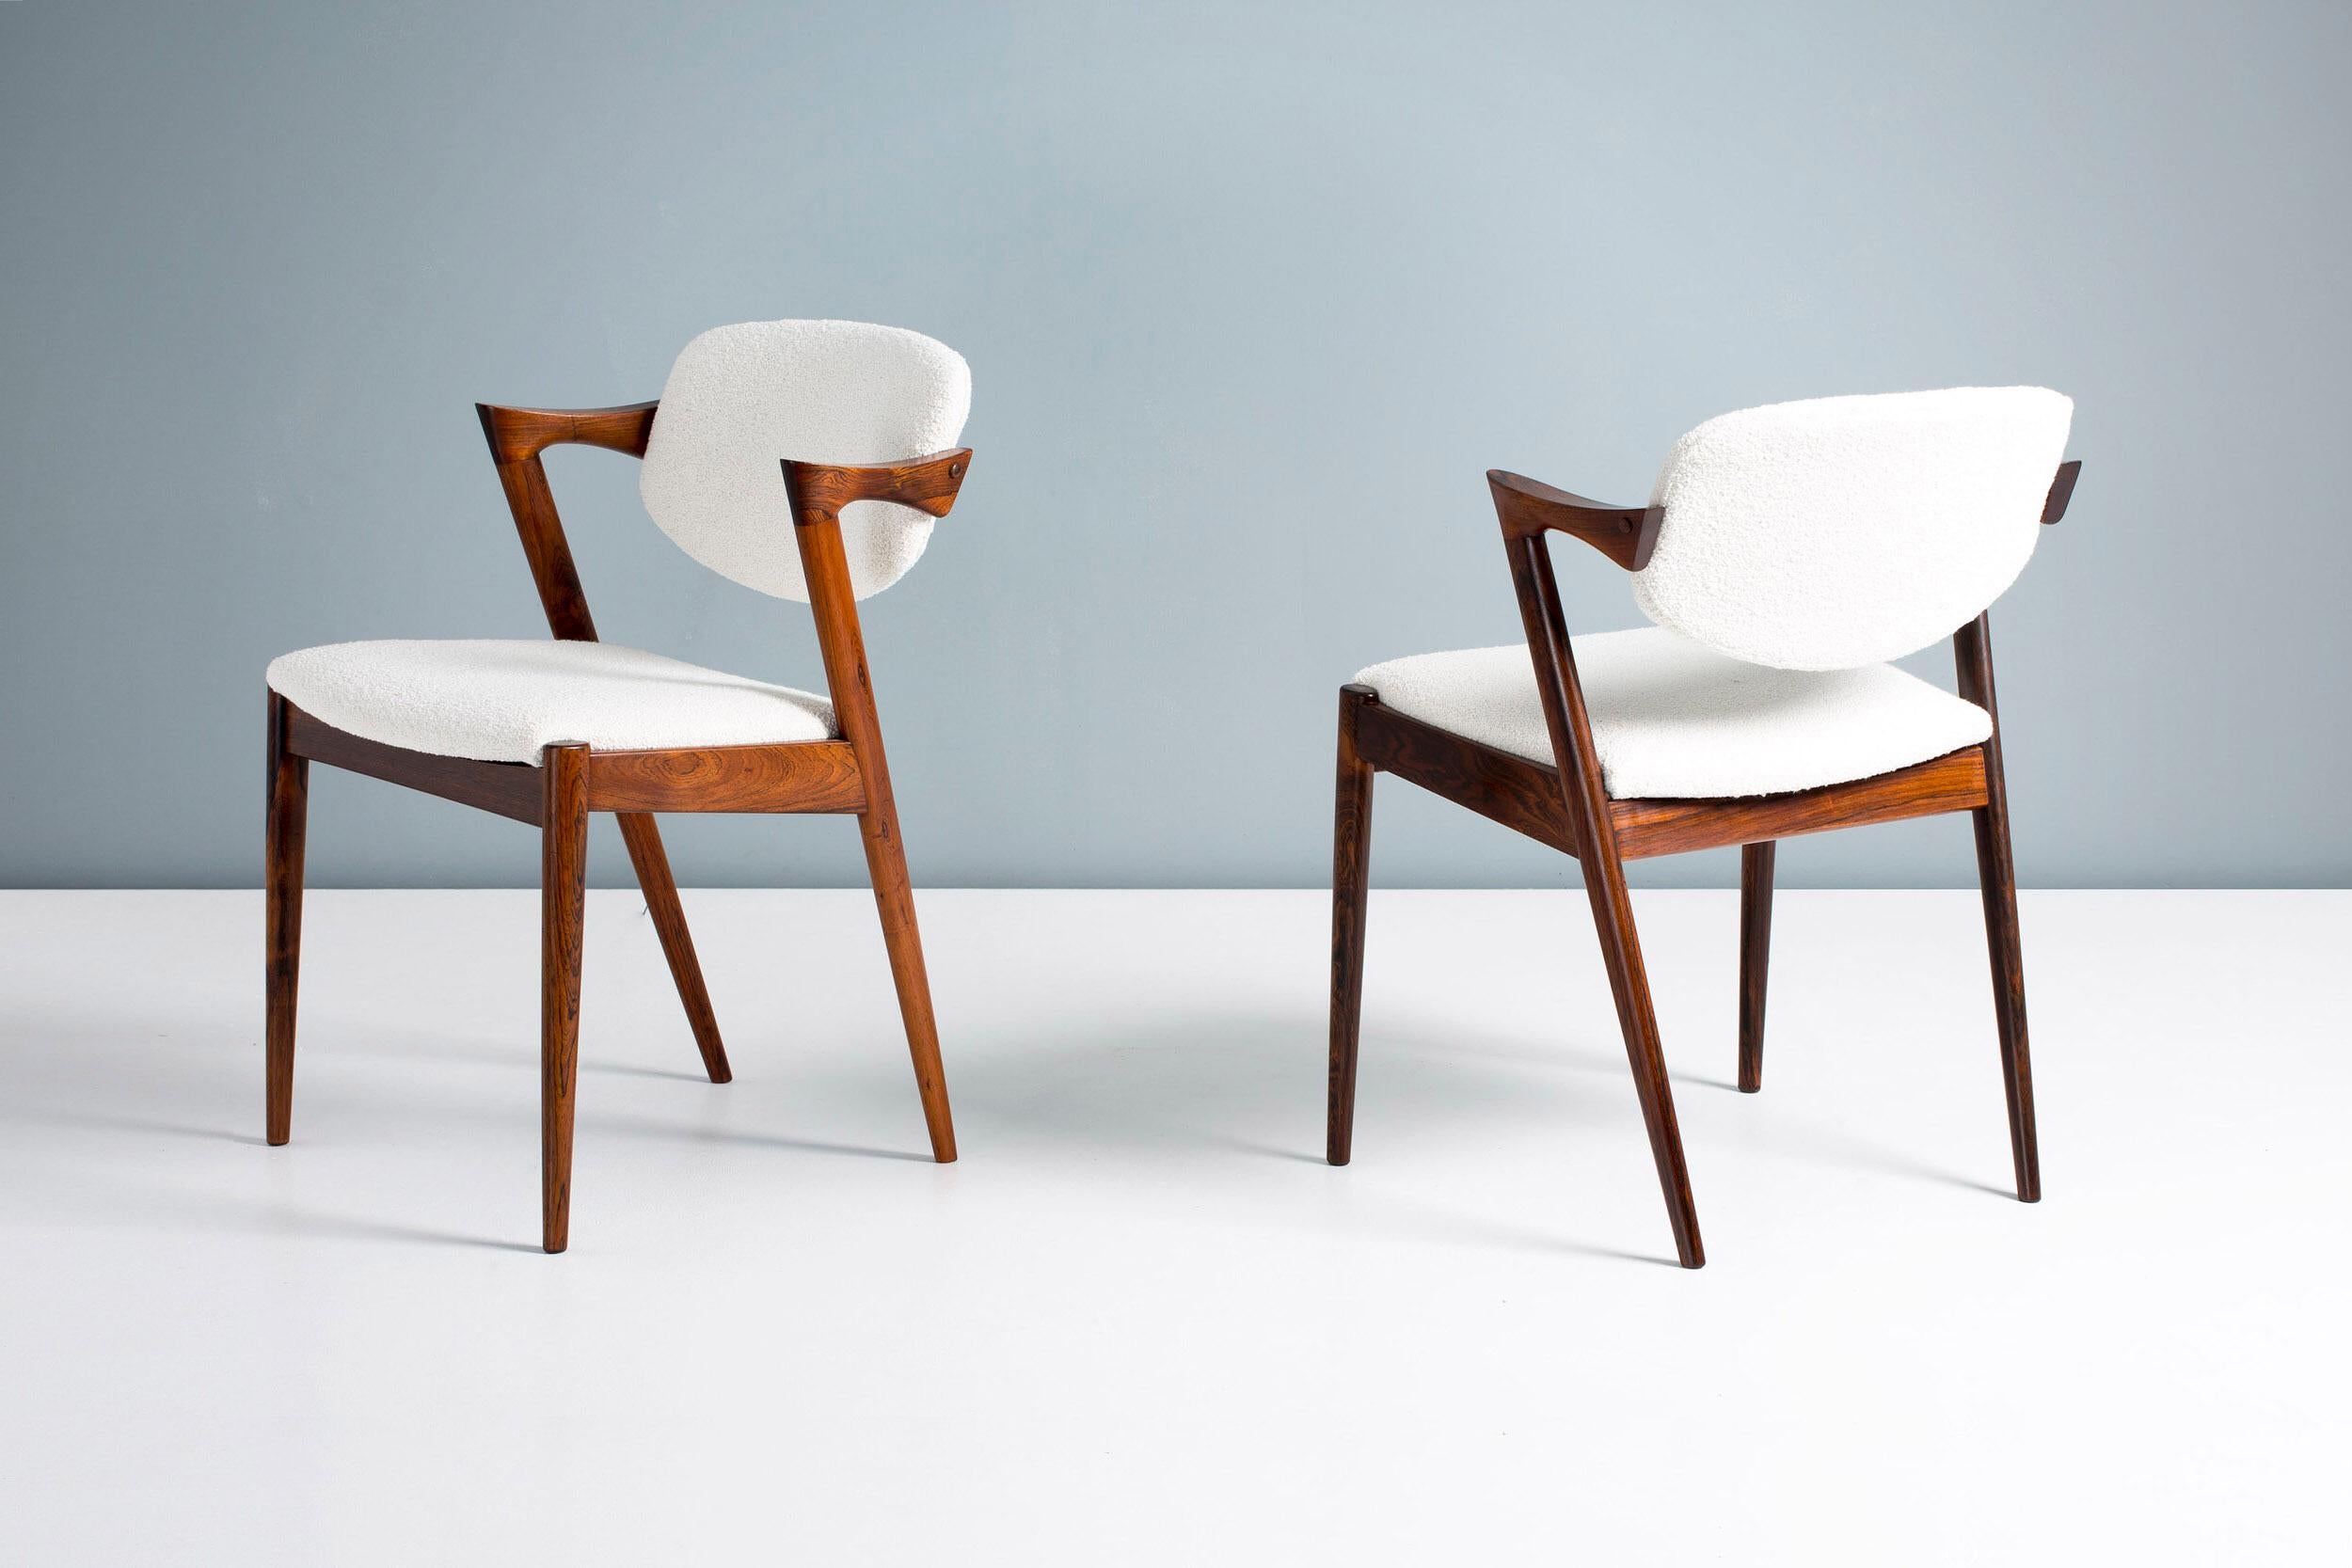 Kai Kristiansen

Model 42 dining chairs, 1956.

Set of 6 dining chairs produced by Skovman Andersen for the Illum Bolighus department store in Copenhagen. Refinished rosewood frames with seat and back reupholstered with Chase Erwin embrace